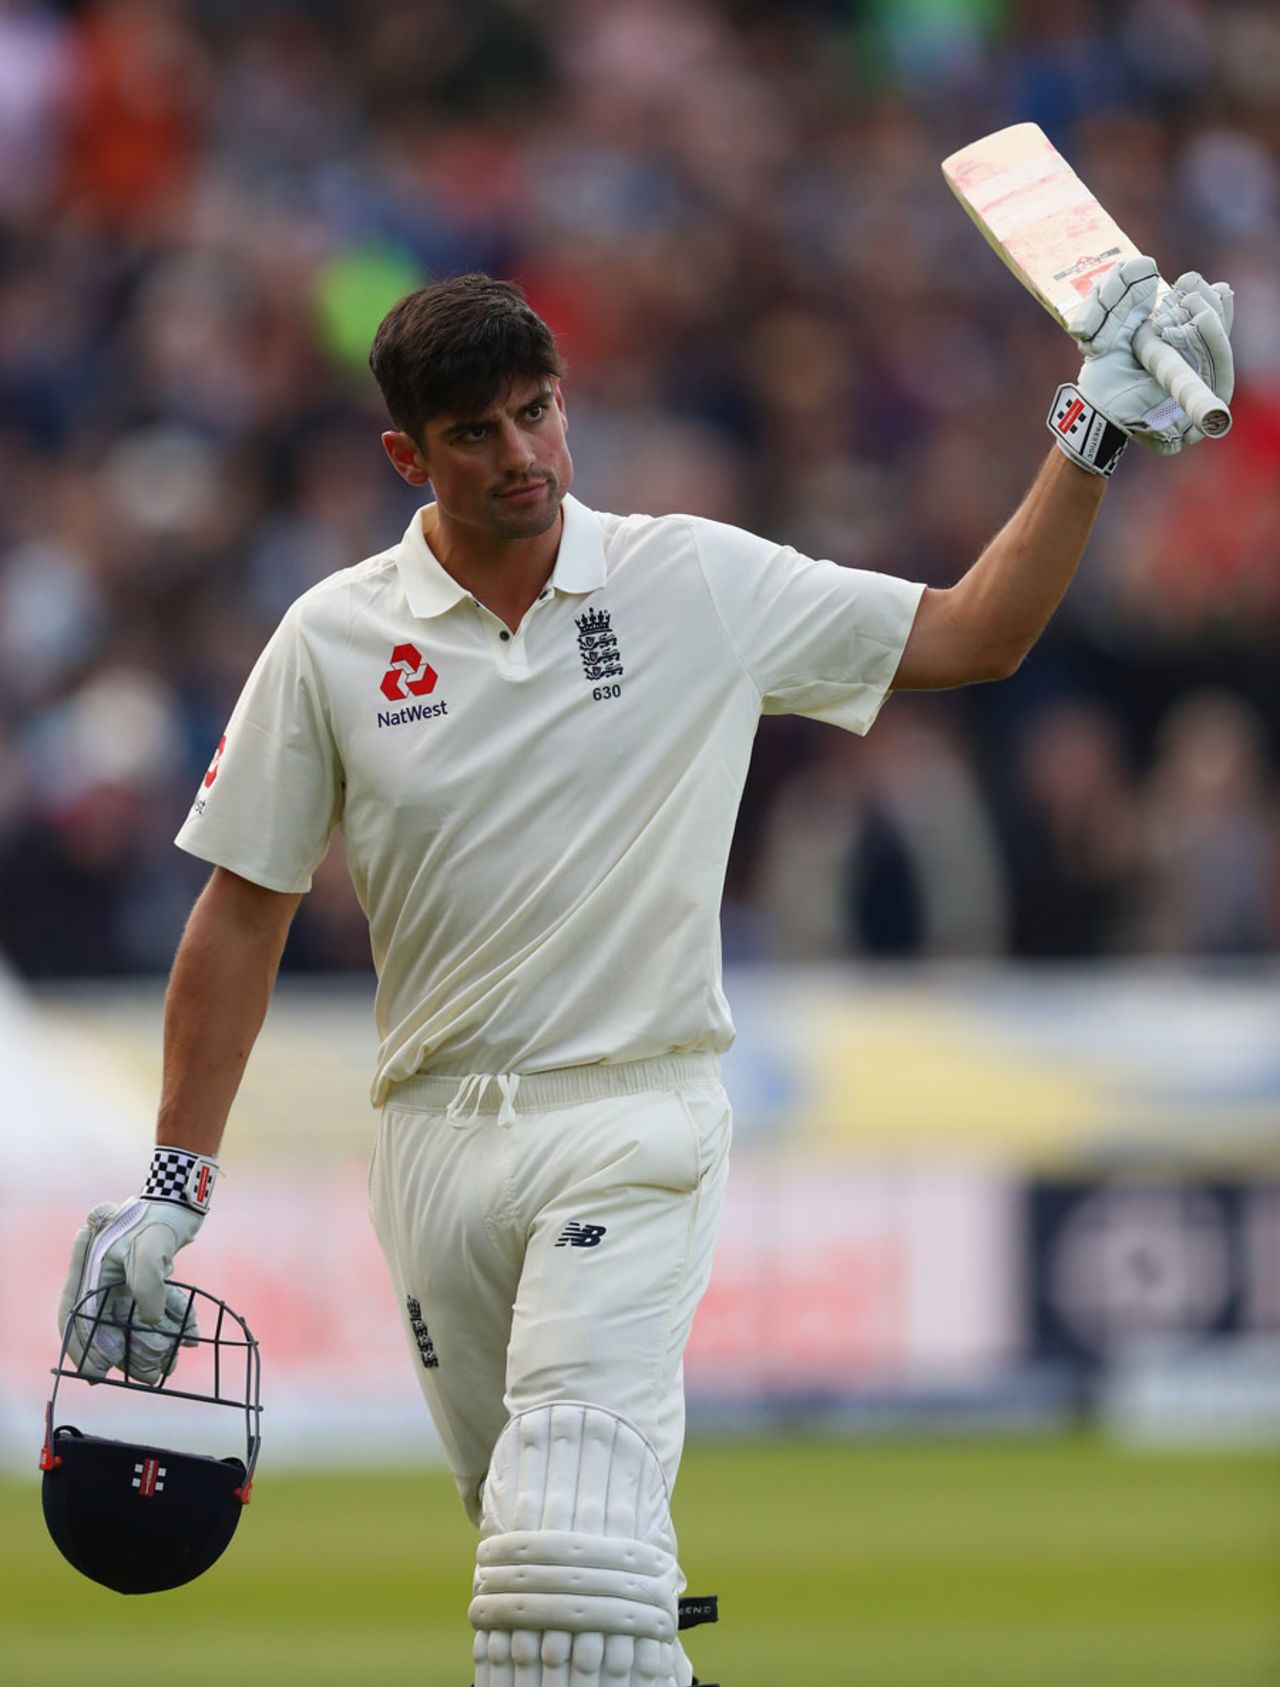 Alastair Cook walks off to an ovation after making 243, England v West Indies, 1st Investec Test, Edgbaston, 2nd day, August 18, 2017